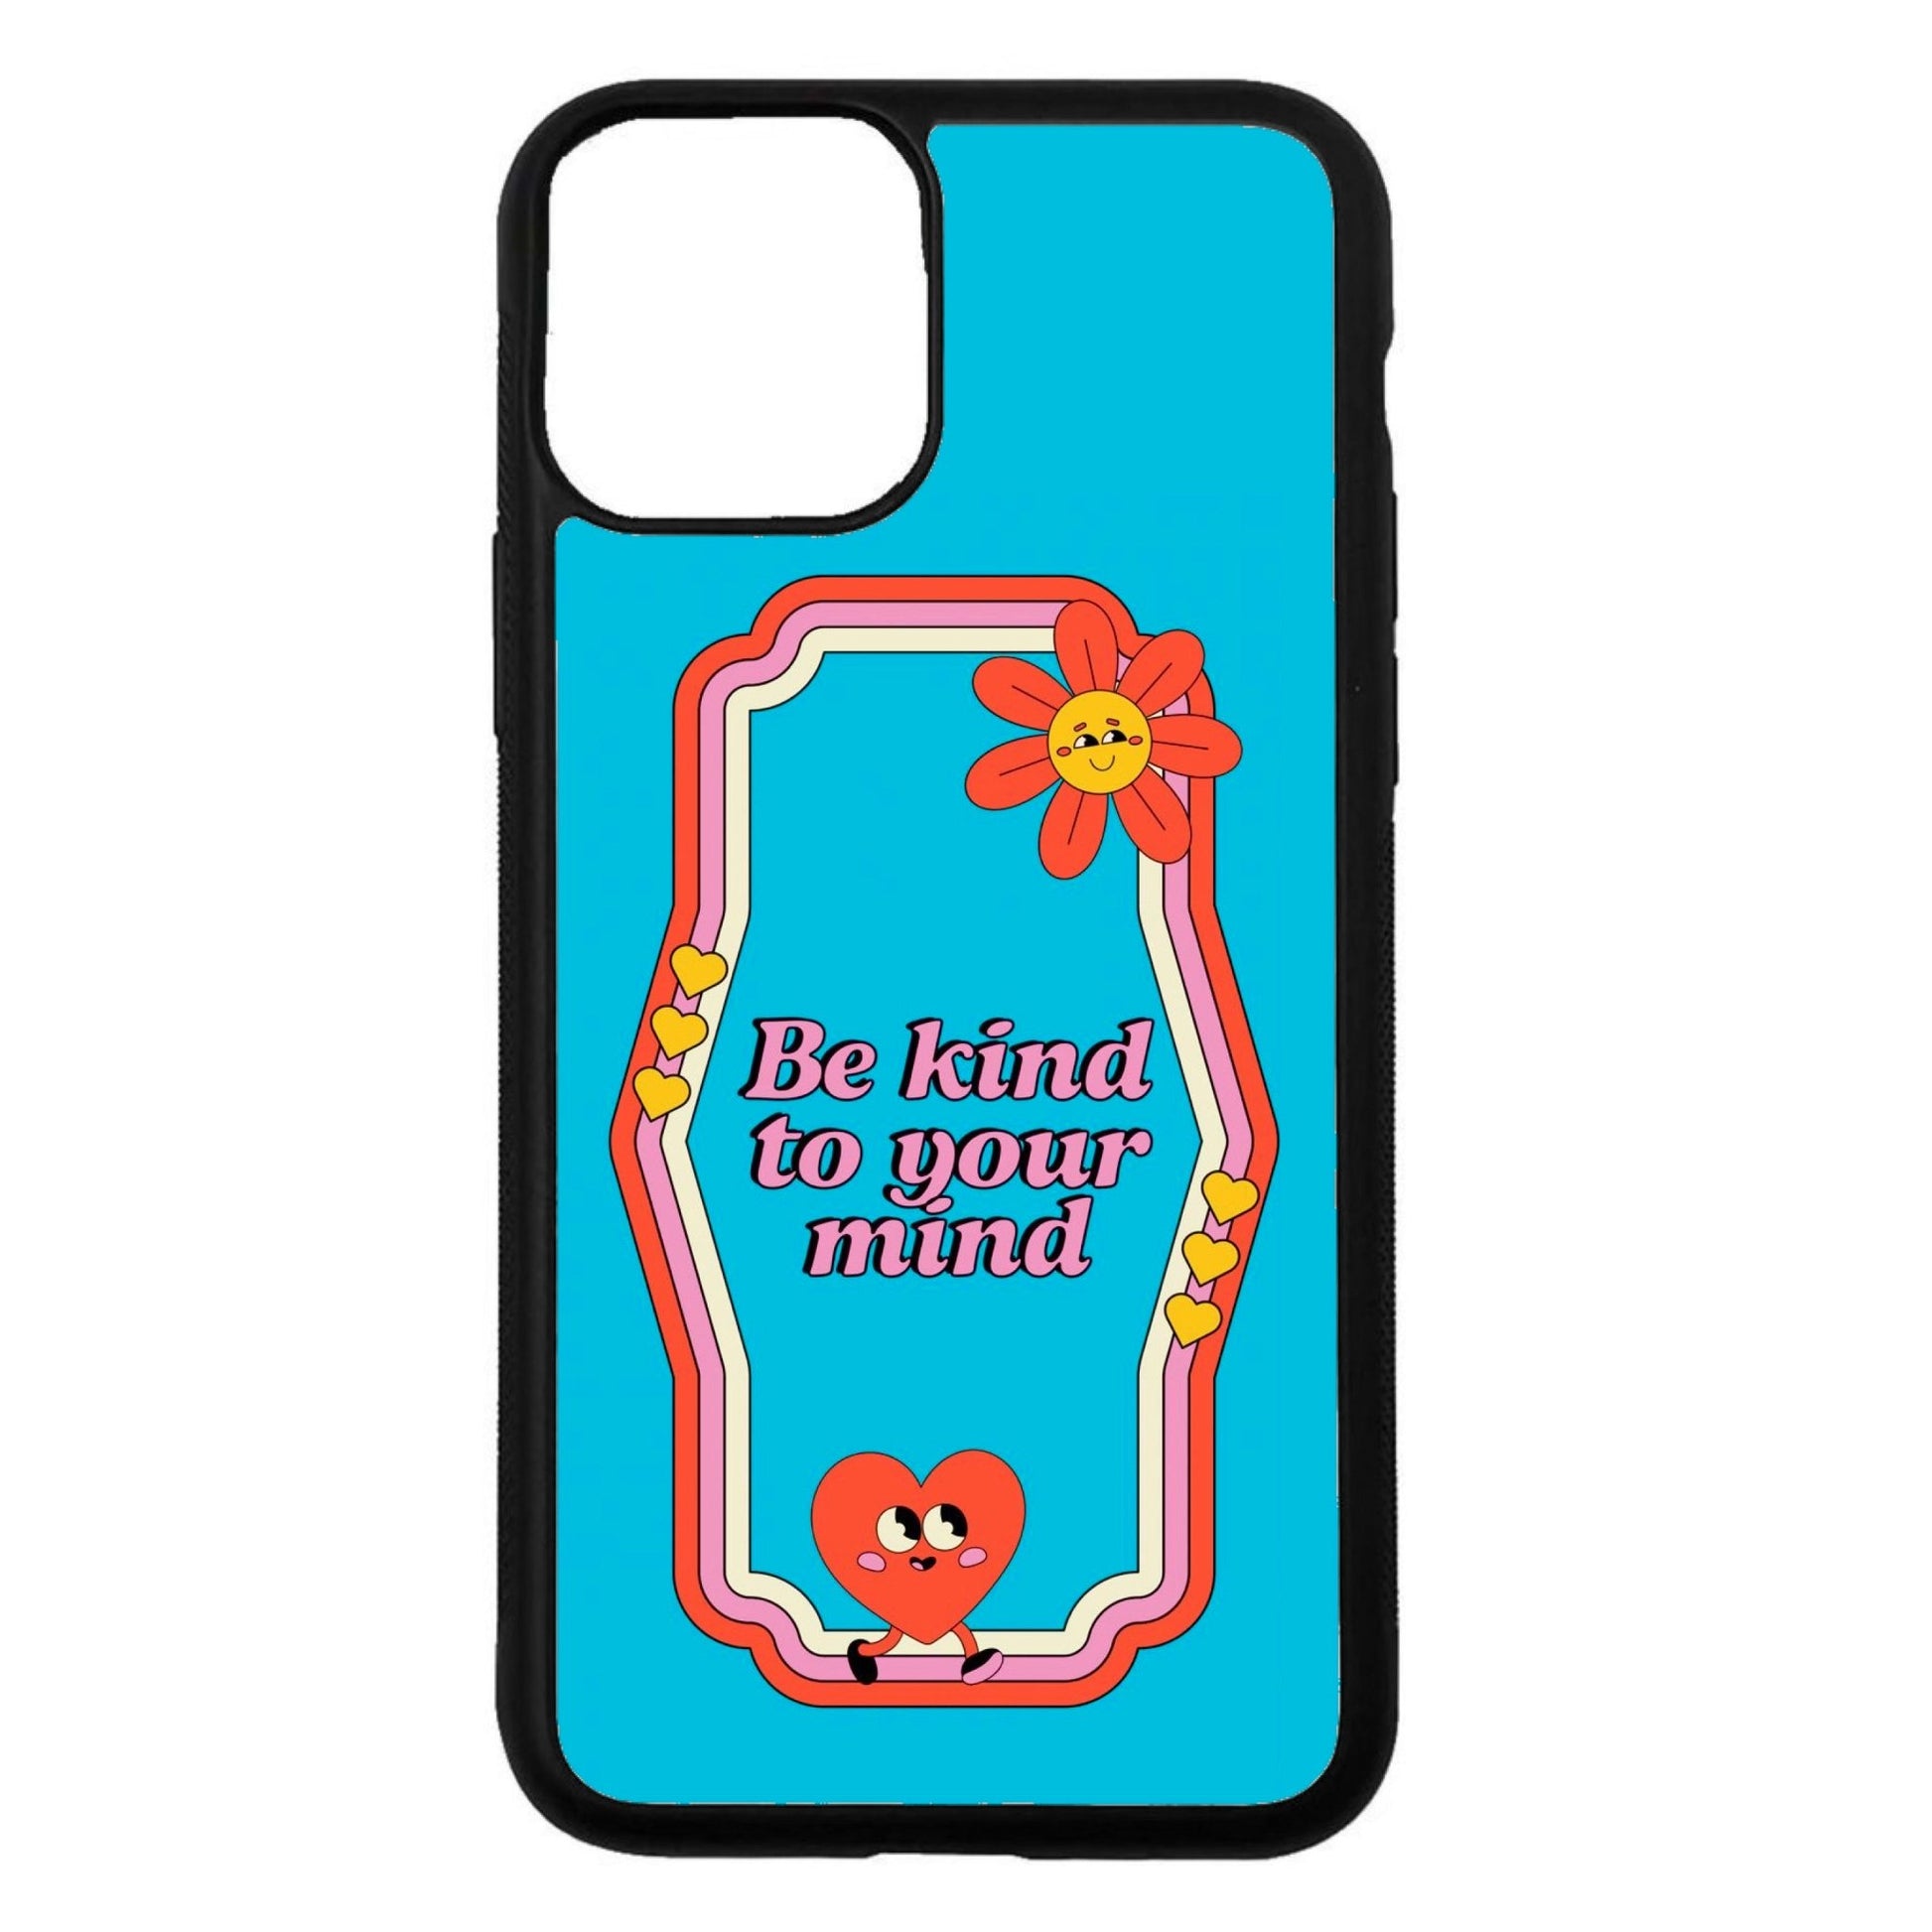 be kind to your mind - MAI CASES